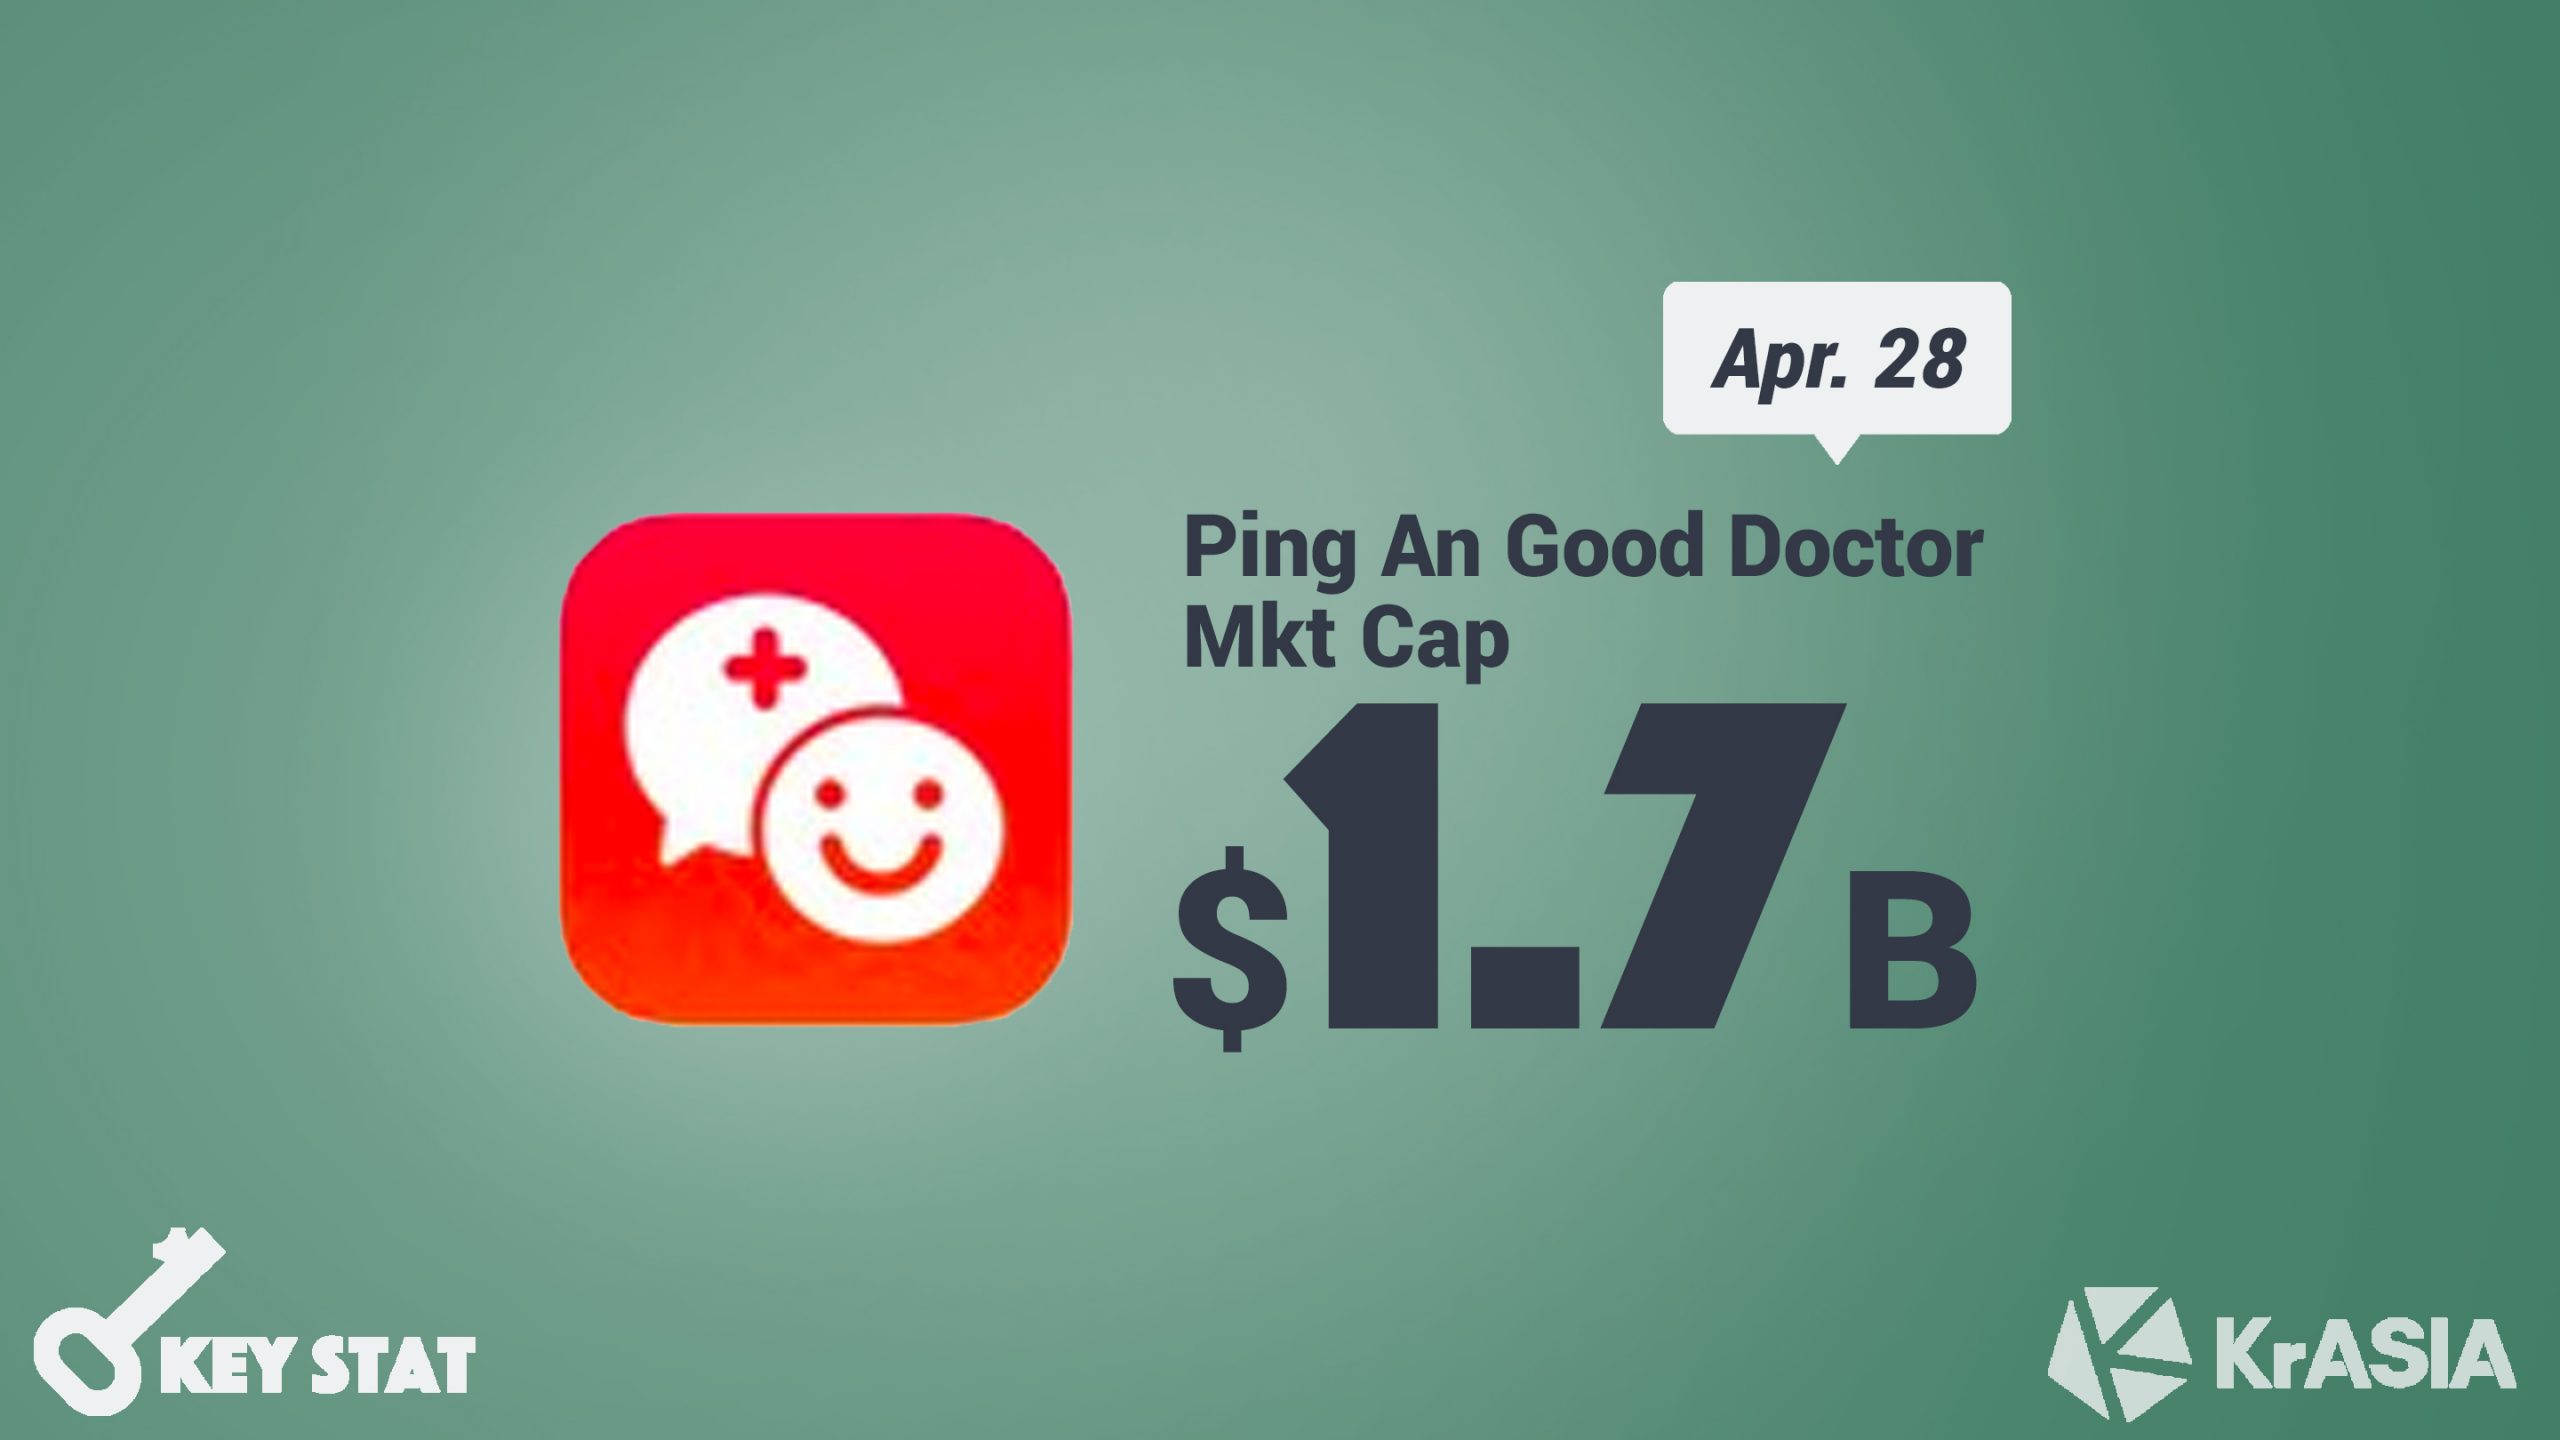 KEY STAT | Ping An Good Doctor shares almost doubled after new user influx amidst COVID-19 outbreak